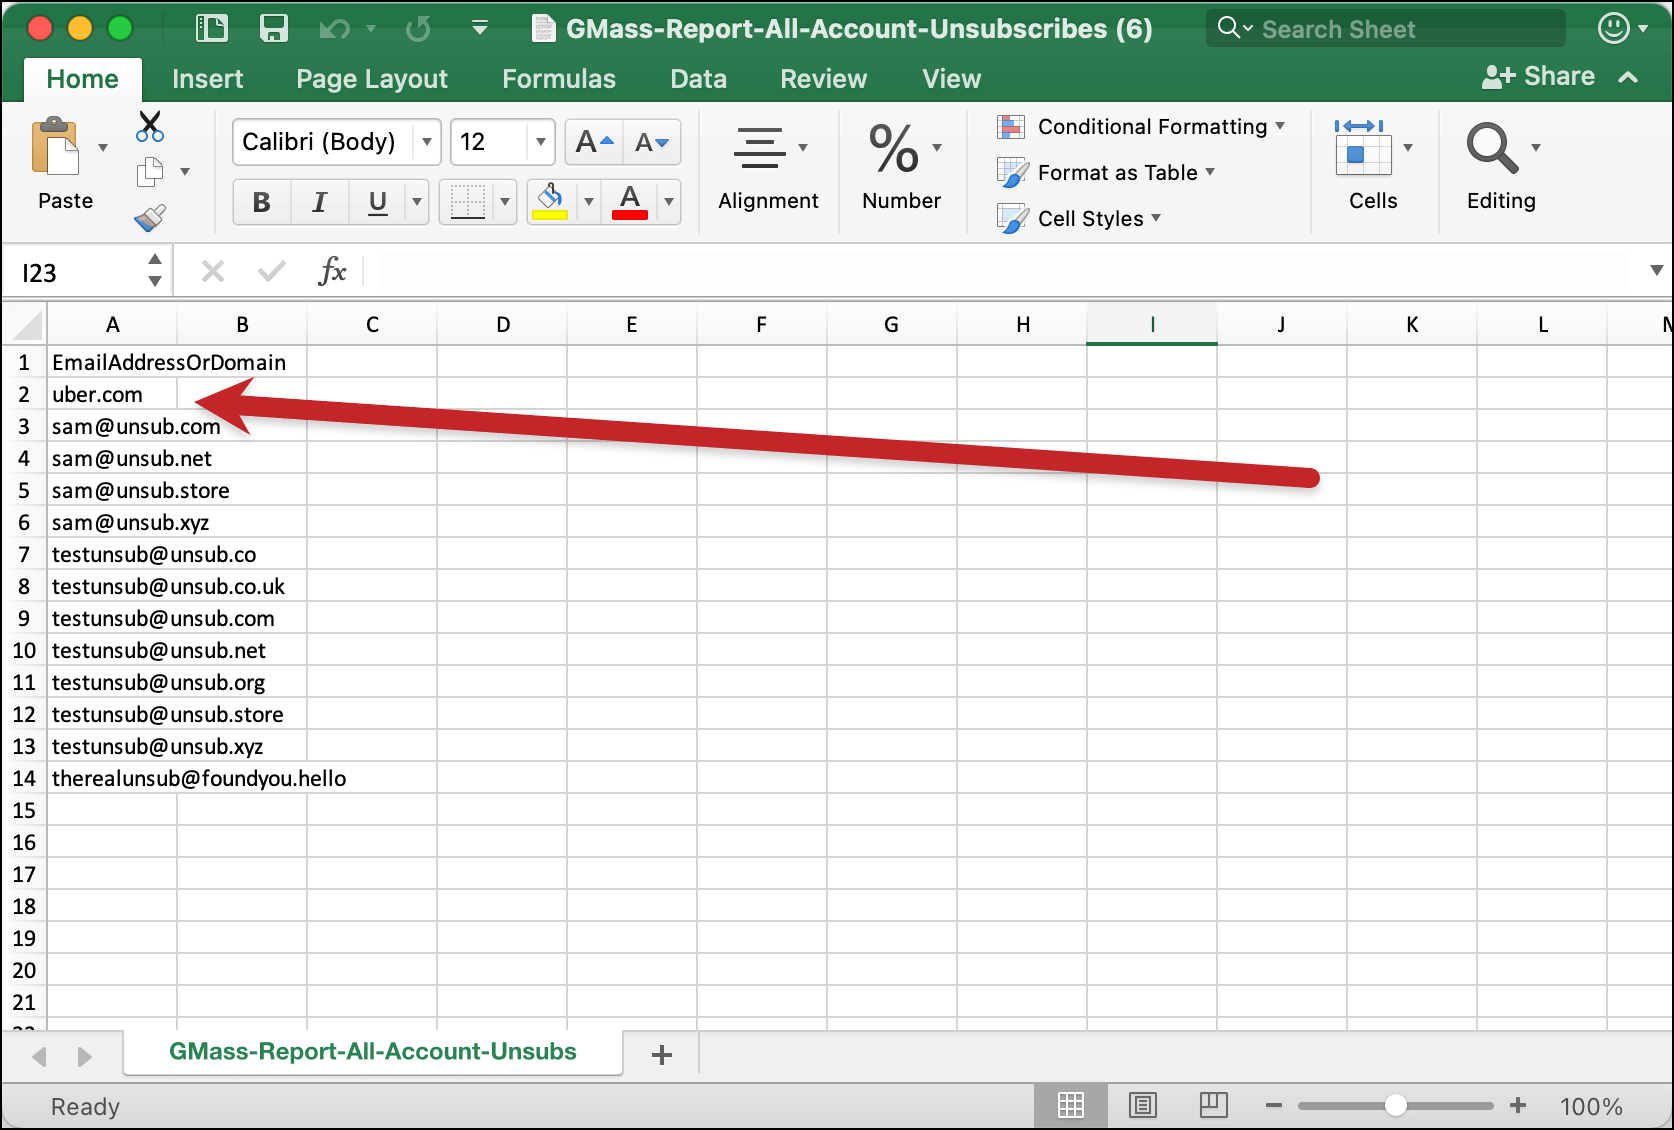 CSV of unsubscribes with the domain at the top